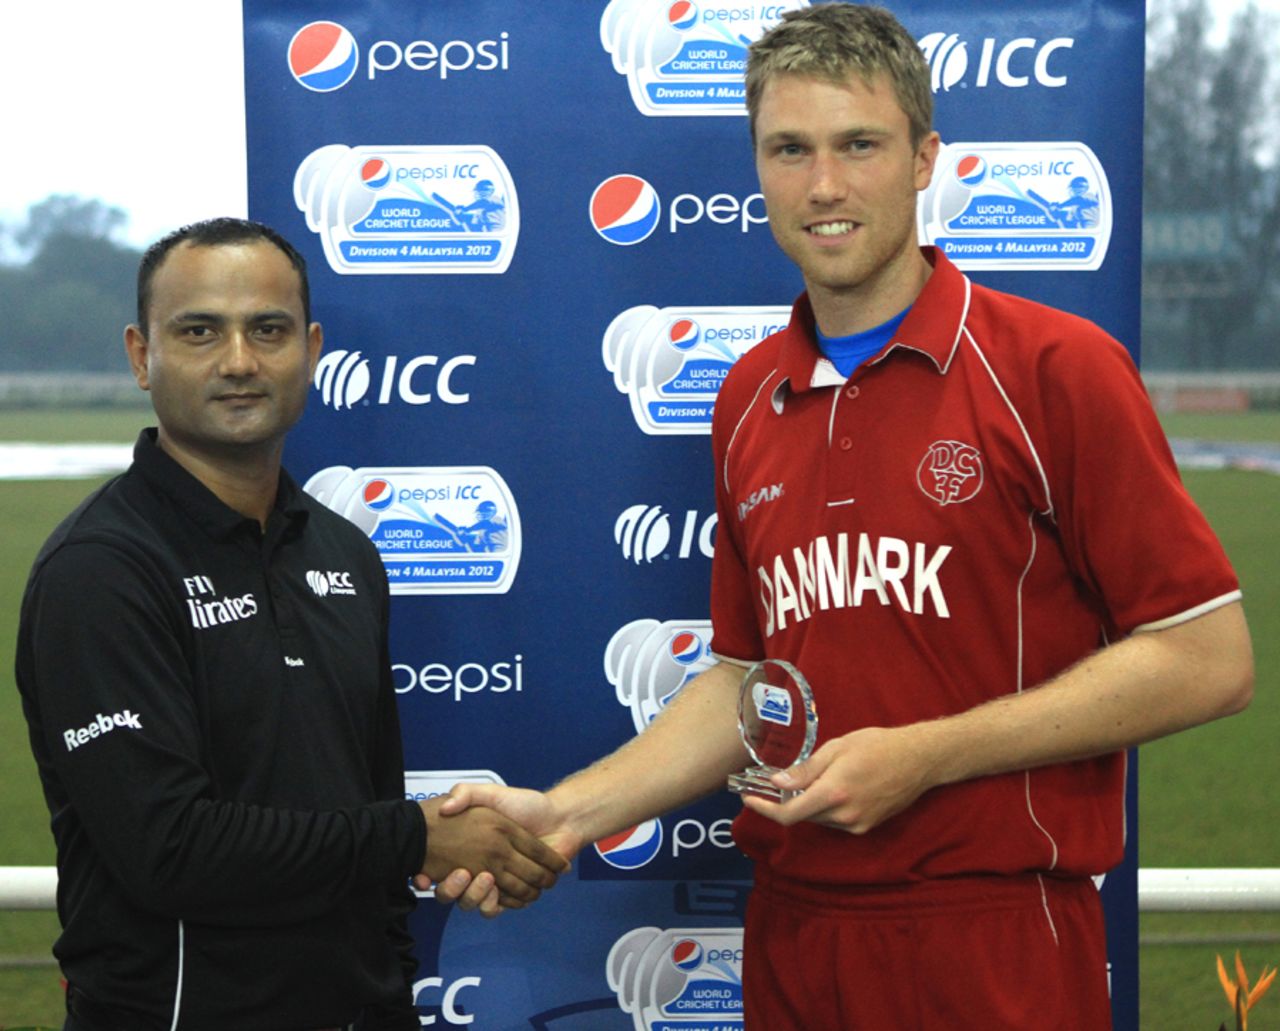 Michael Pedersen with the man-of-the-match award, Denmark v United States of America, ICC World Cricket League Division Four 2012, September 4, 2012